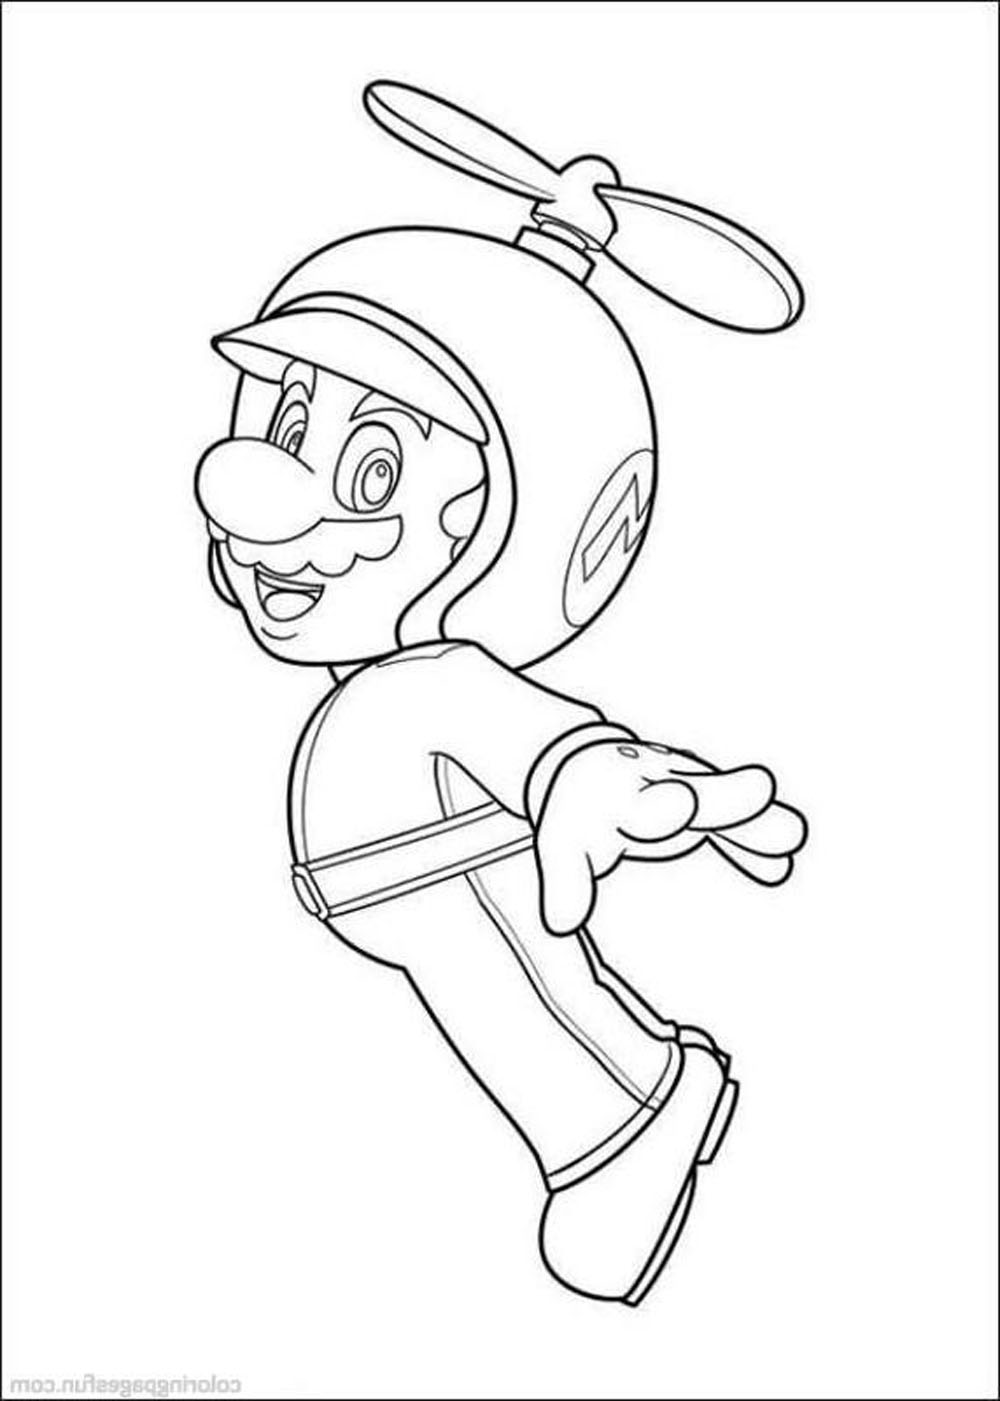 baby-mario-coloring-pages-bestappsforkids